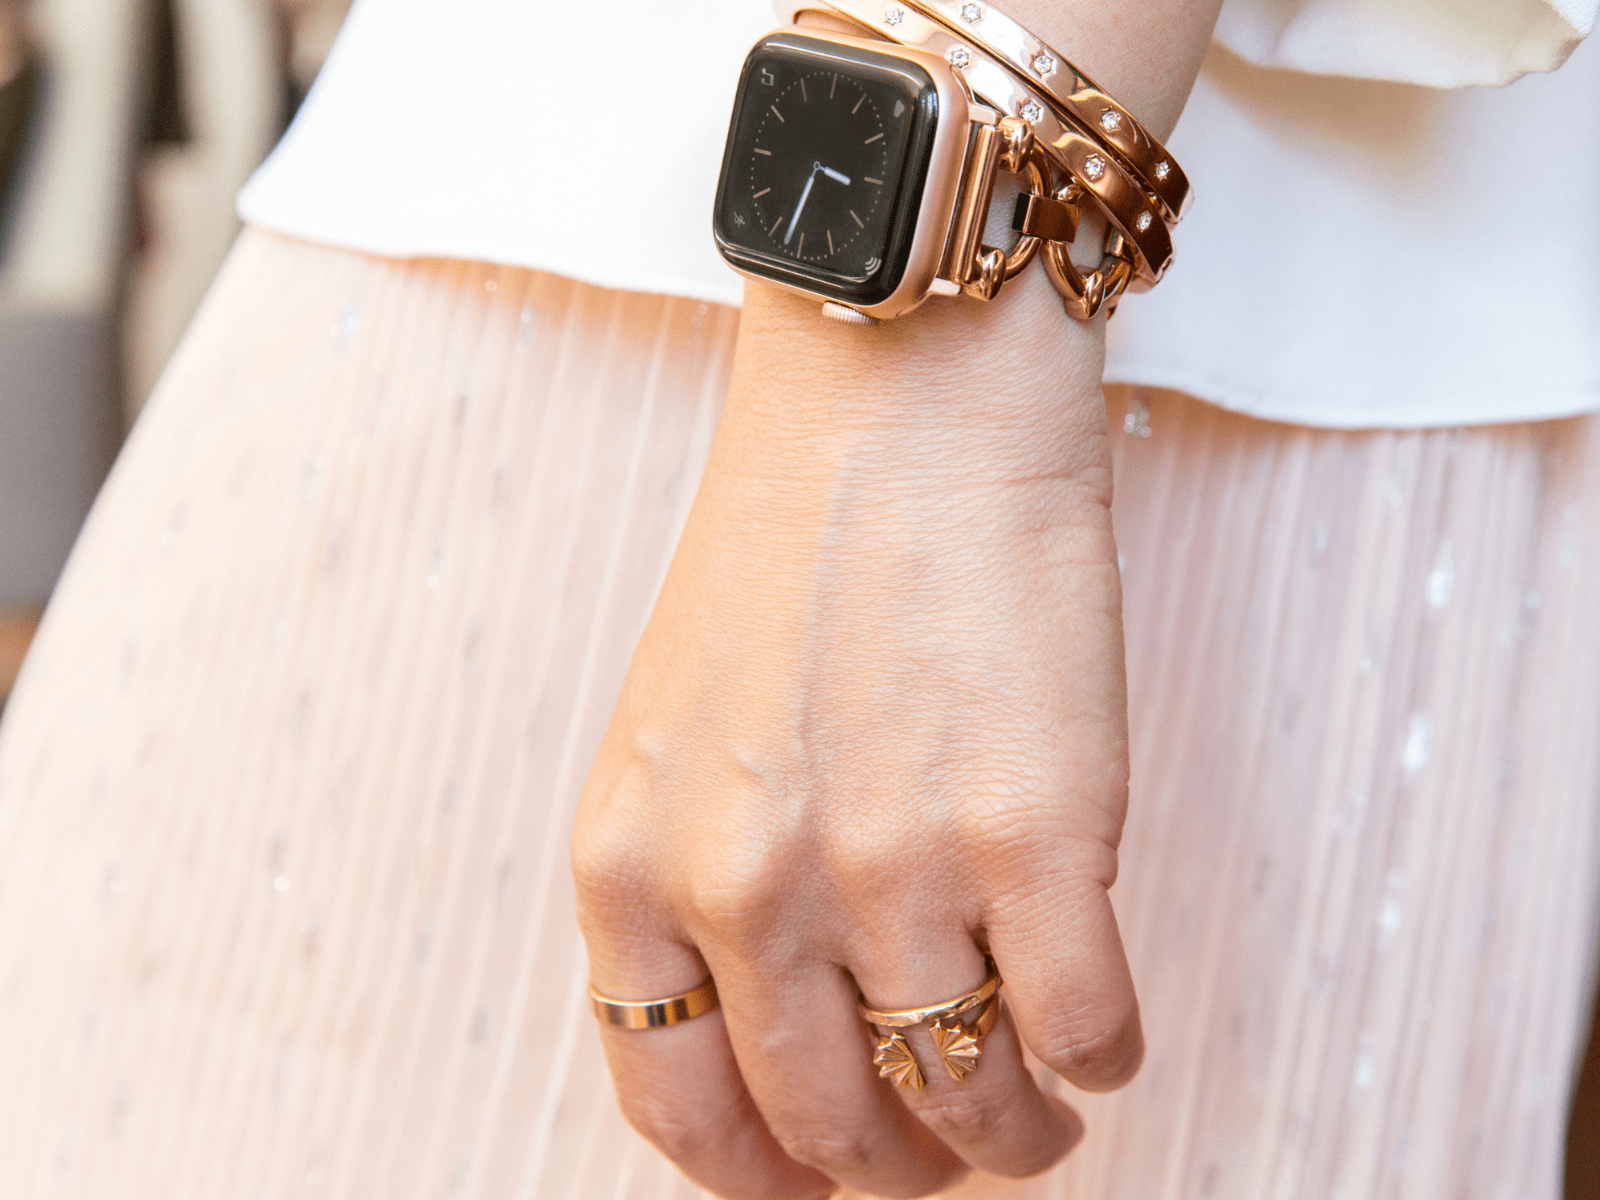 Starburst Ring - Goldenerre Women's Apple Watch Bands and Jewelry